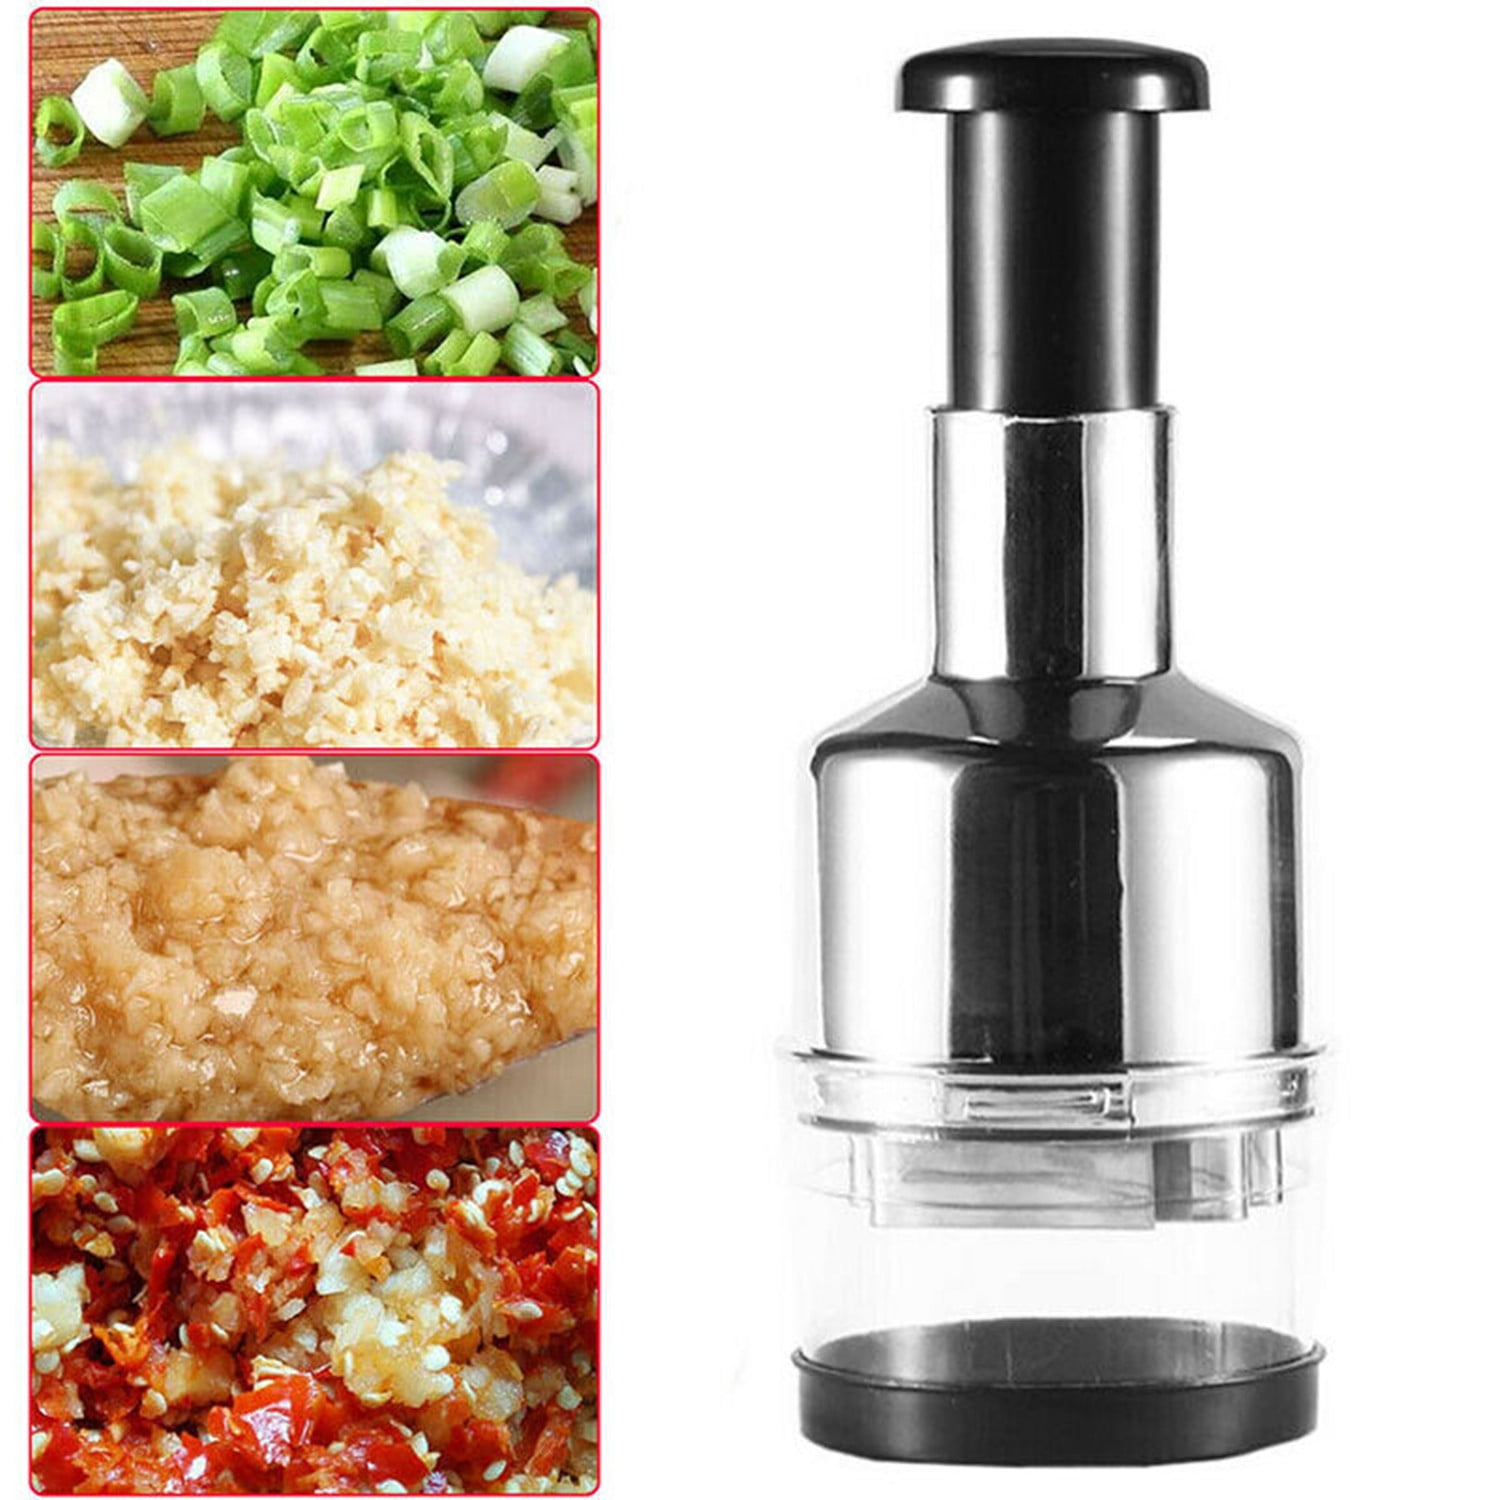  LHS Manual Food Chopper, Easy to Clean Onion Chopper Dicer,  Stainless Steel Hand Chopper for Vegetables, Garlic, Nuts, Salsa Maker -  Dishwasher Safe : Movies & TV